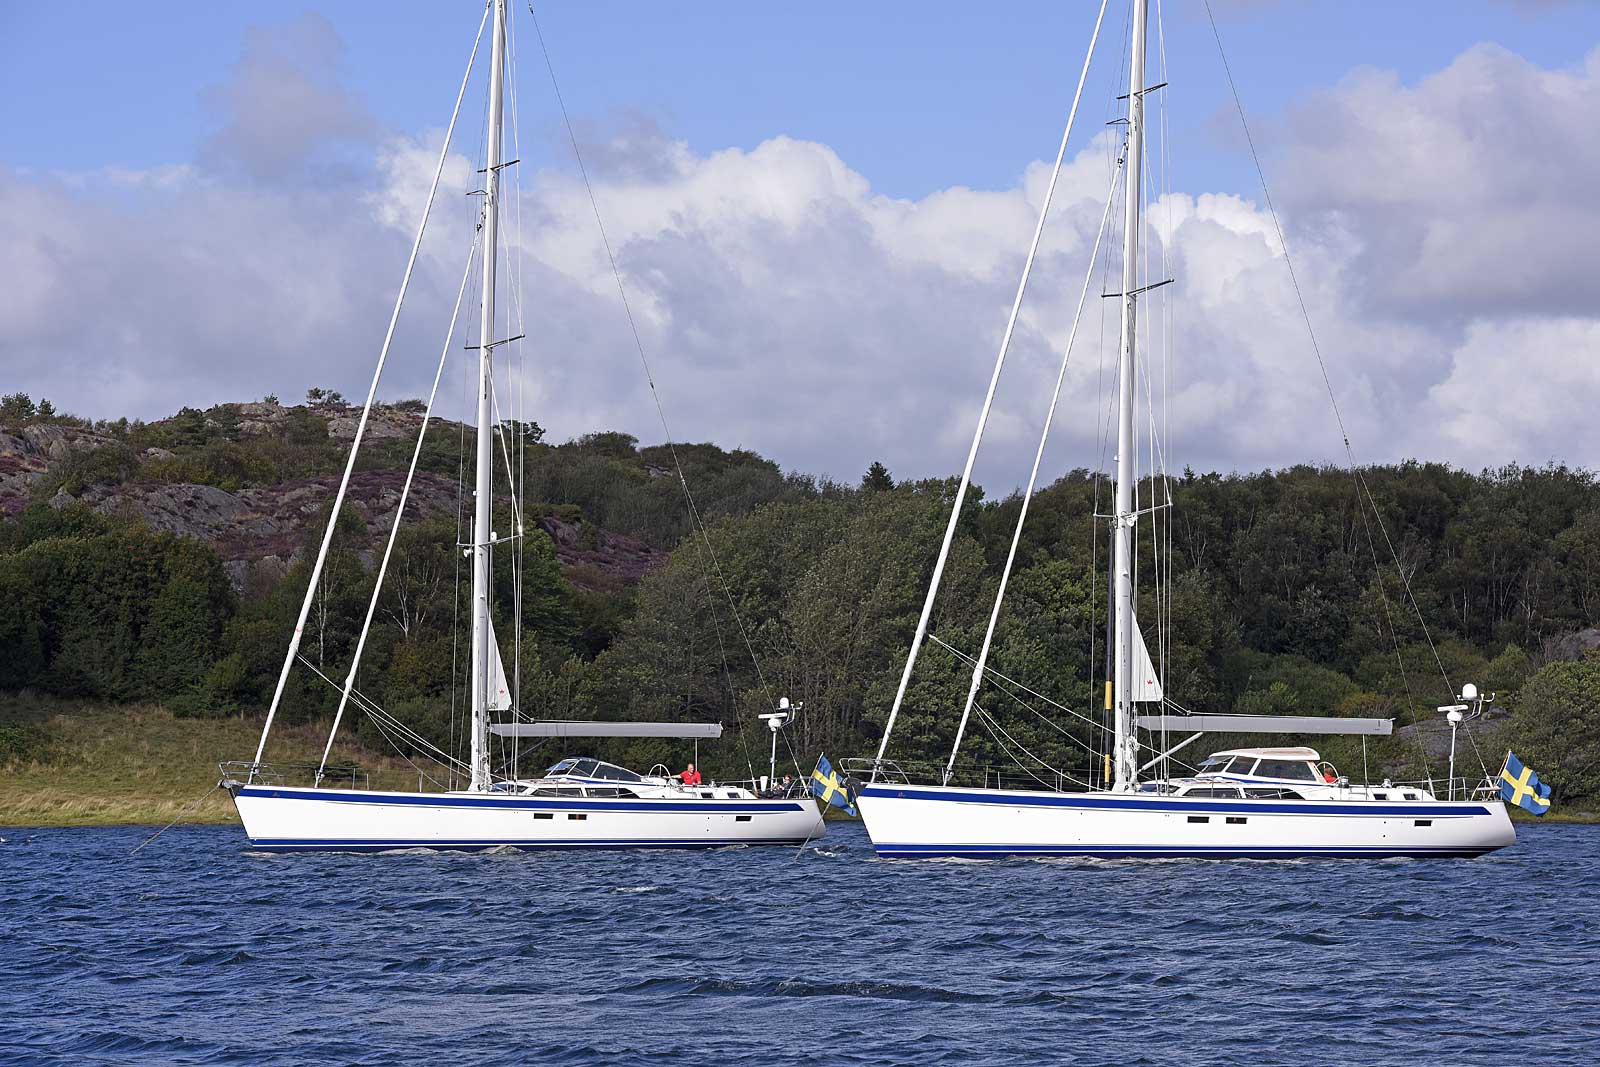 Seven Hallberg-Rassys, for example a 64, at the boat show in Neustadt 27-29 May